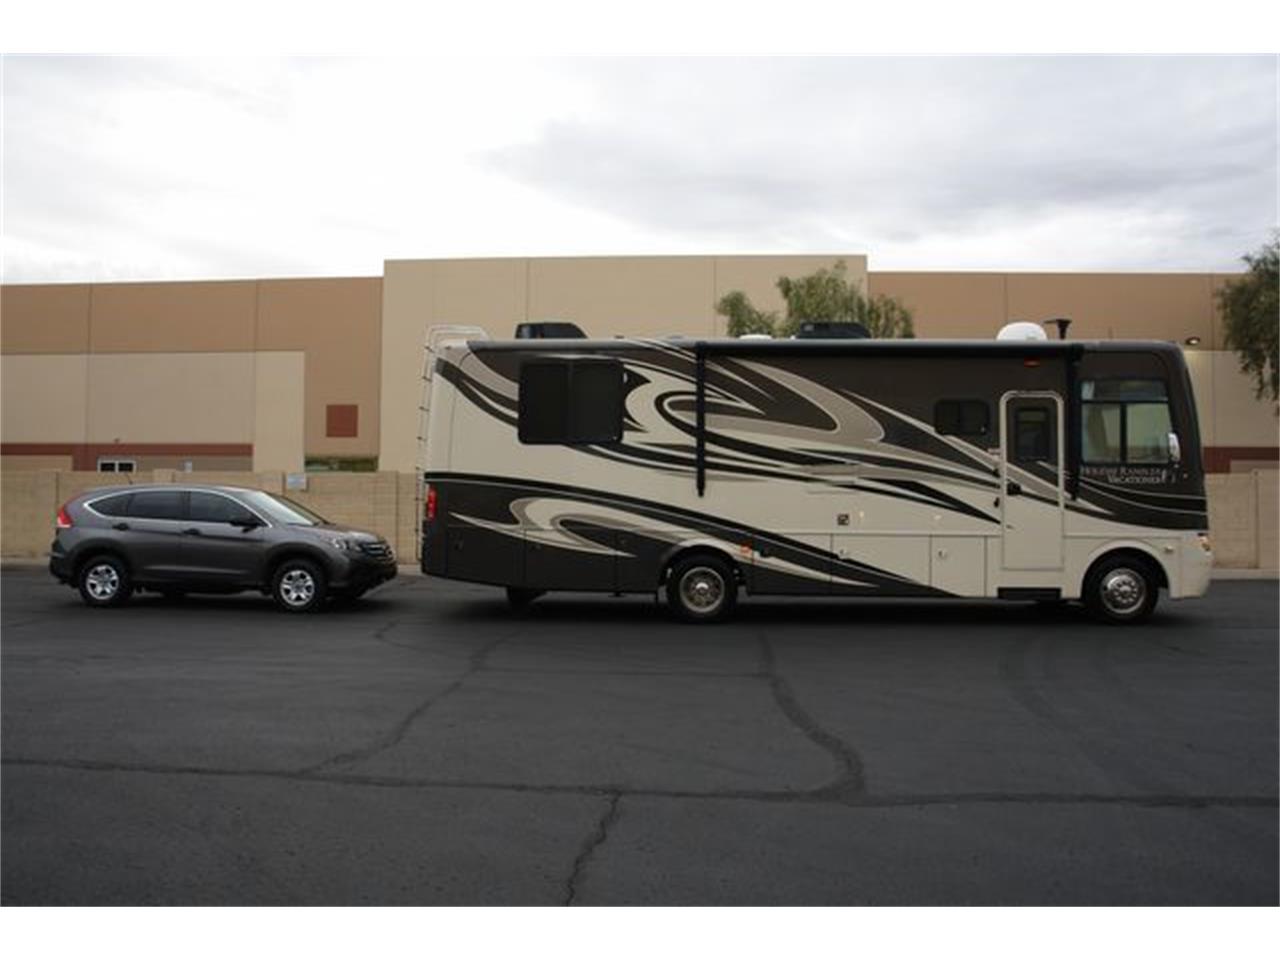 2012 Holiday Rambler Vacationer for Sale | ClassicCars.com | CC-1309261